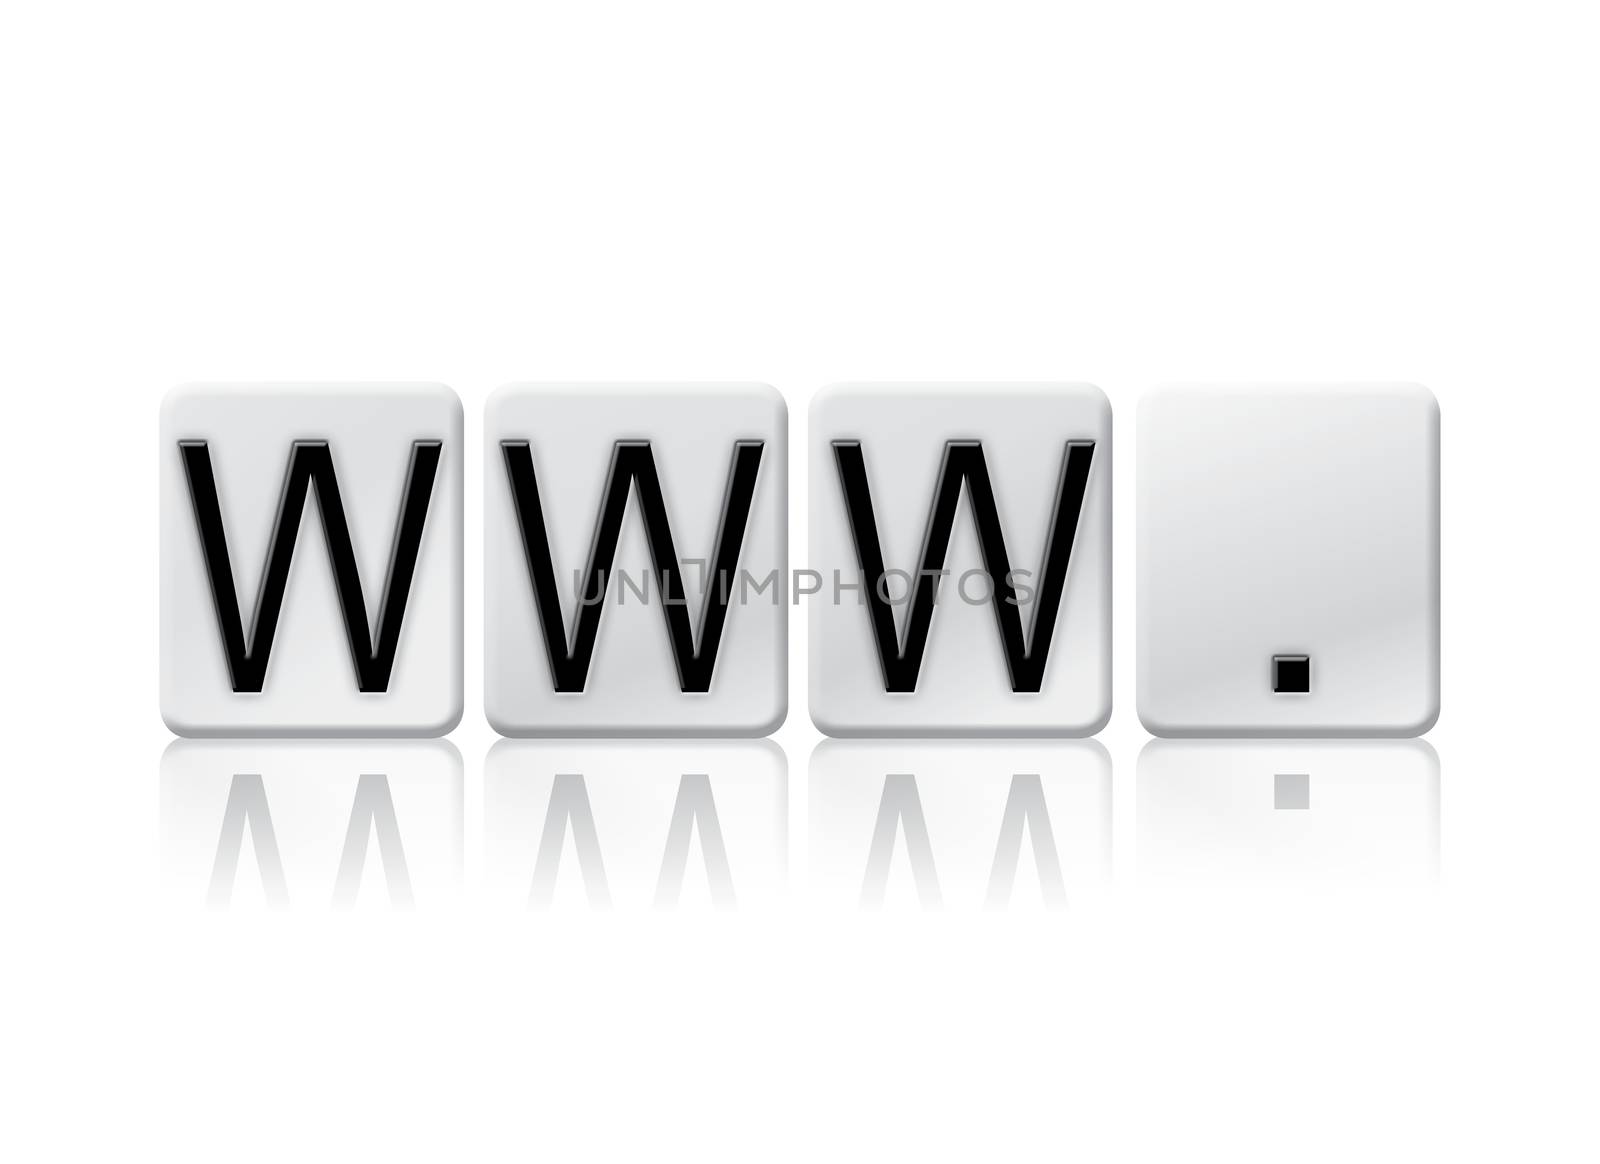 The word "www." written in tile letters isolated on a white background.